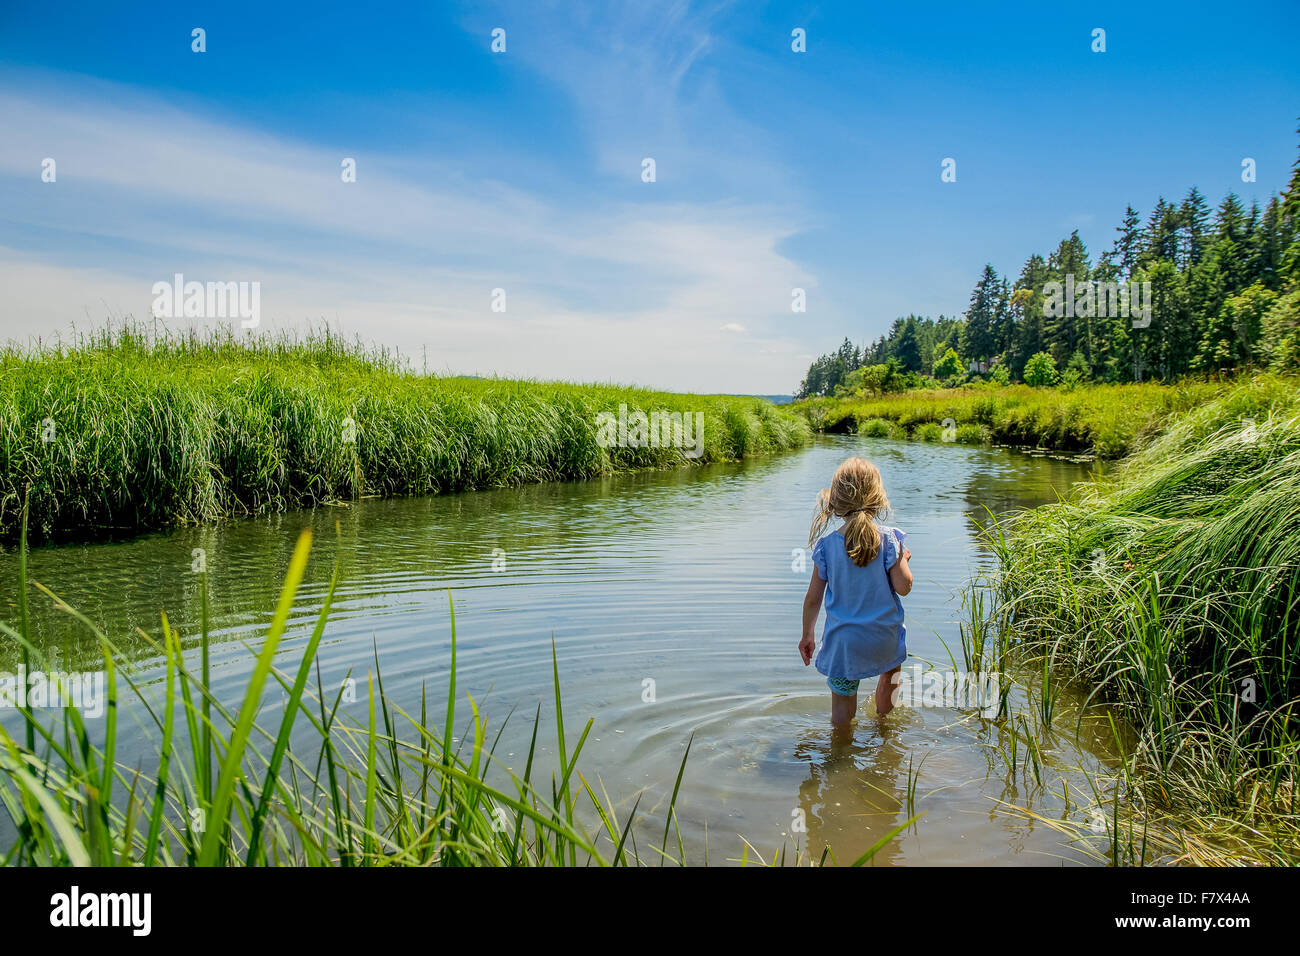 Rear view of girl walking in river Stock Photo